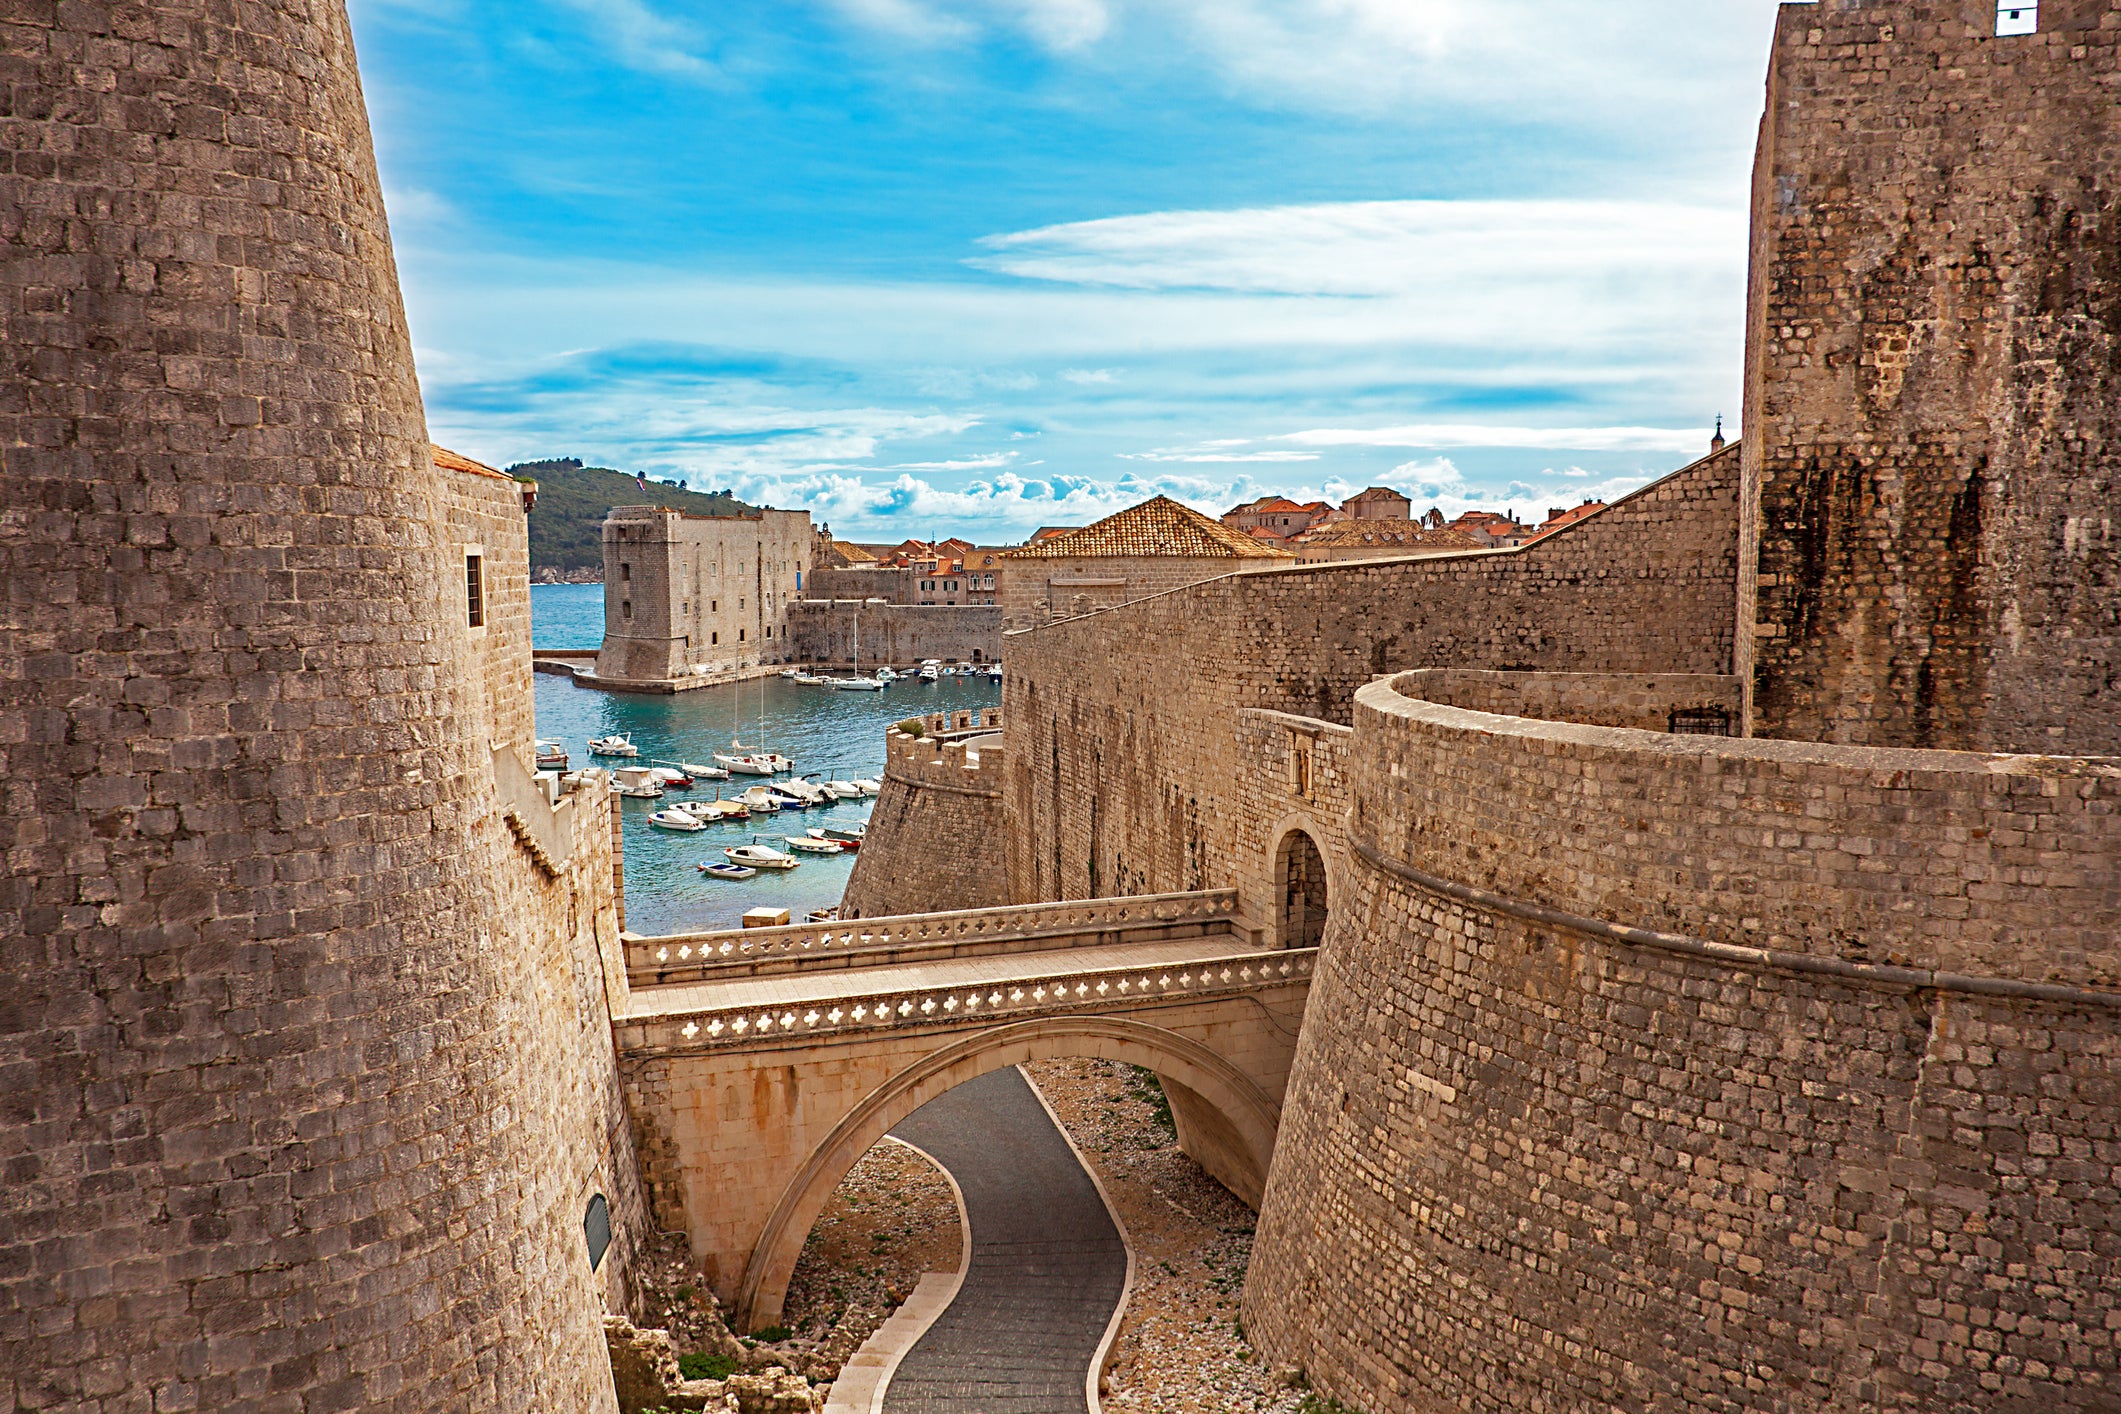 Dubrovnik’s Old Town is a Unesco World Heritage site